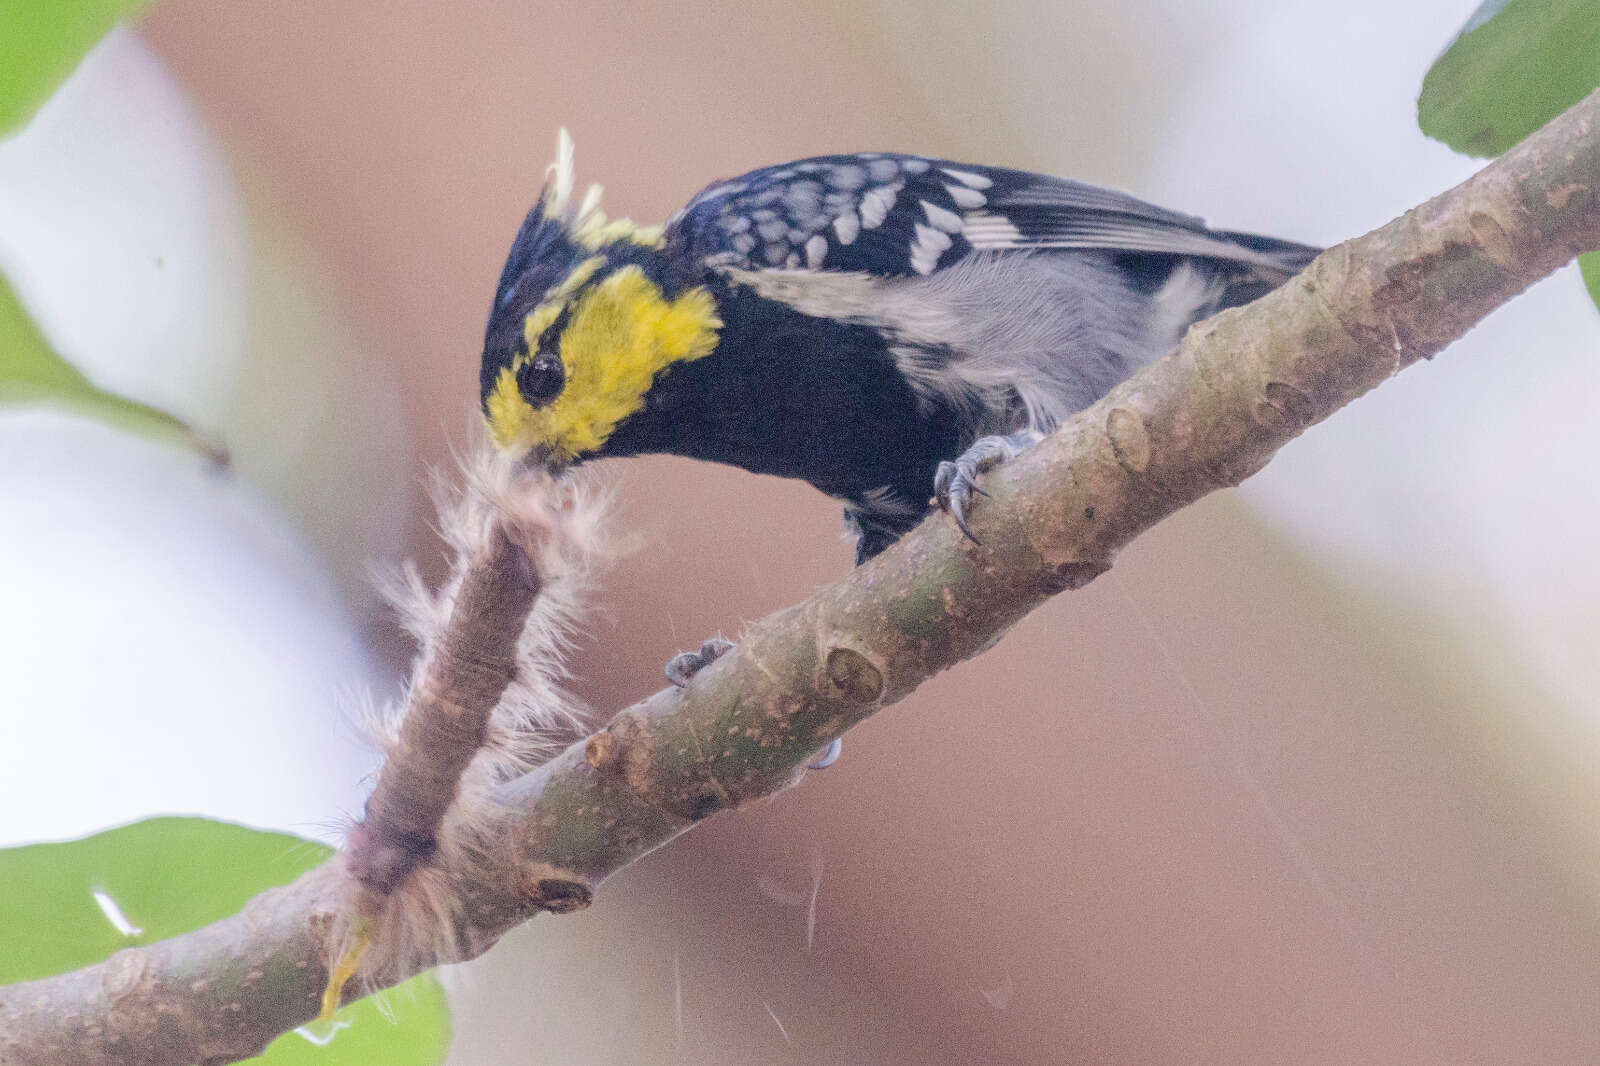 Image of Yellow-cheeked Tit